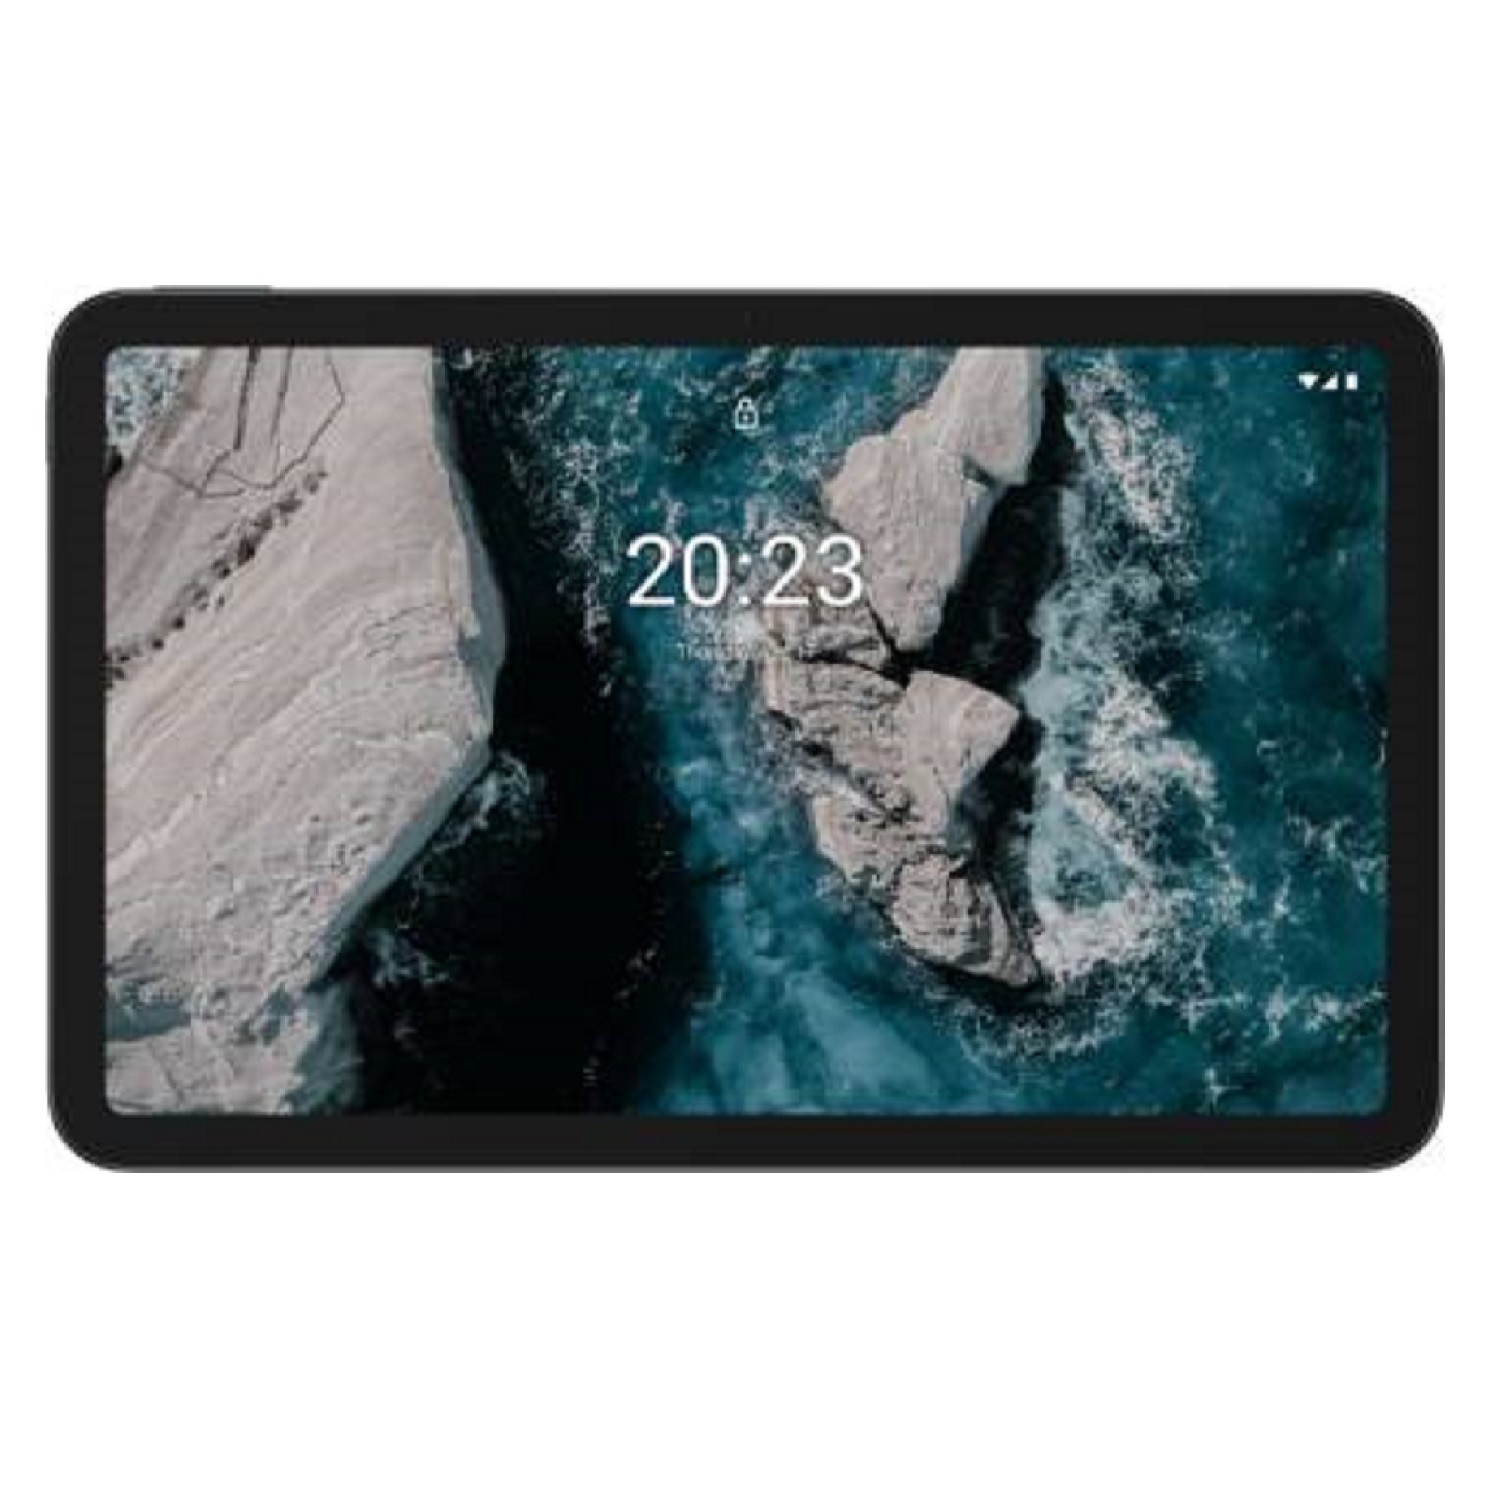 Nokia Tab T20 4GB RAM 64GB ROM 10.36 inch with Wi-Fi Only Tablet (Blue)